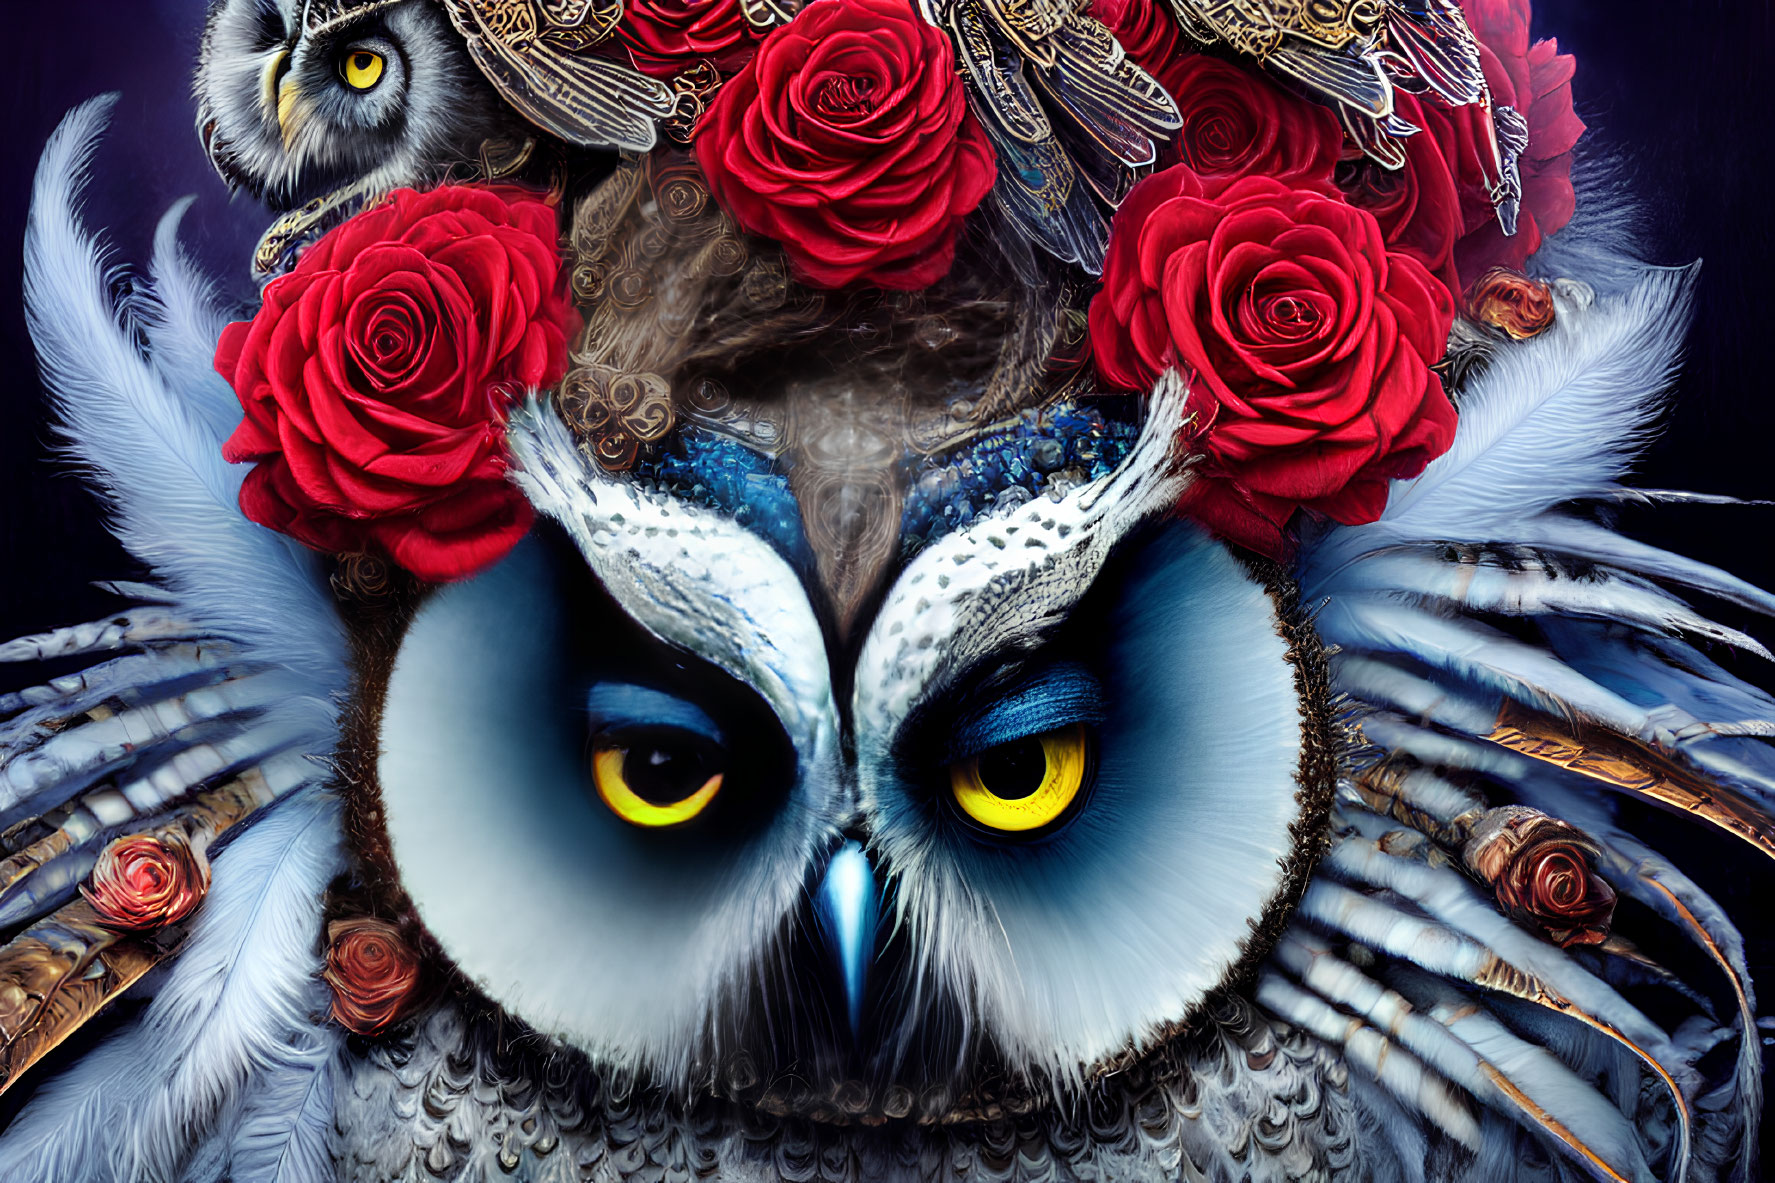 Colorful owl with blue feathers, yellow eyes, roses, and jewelry on dark backdrop